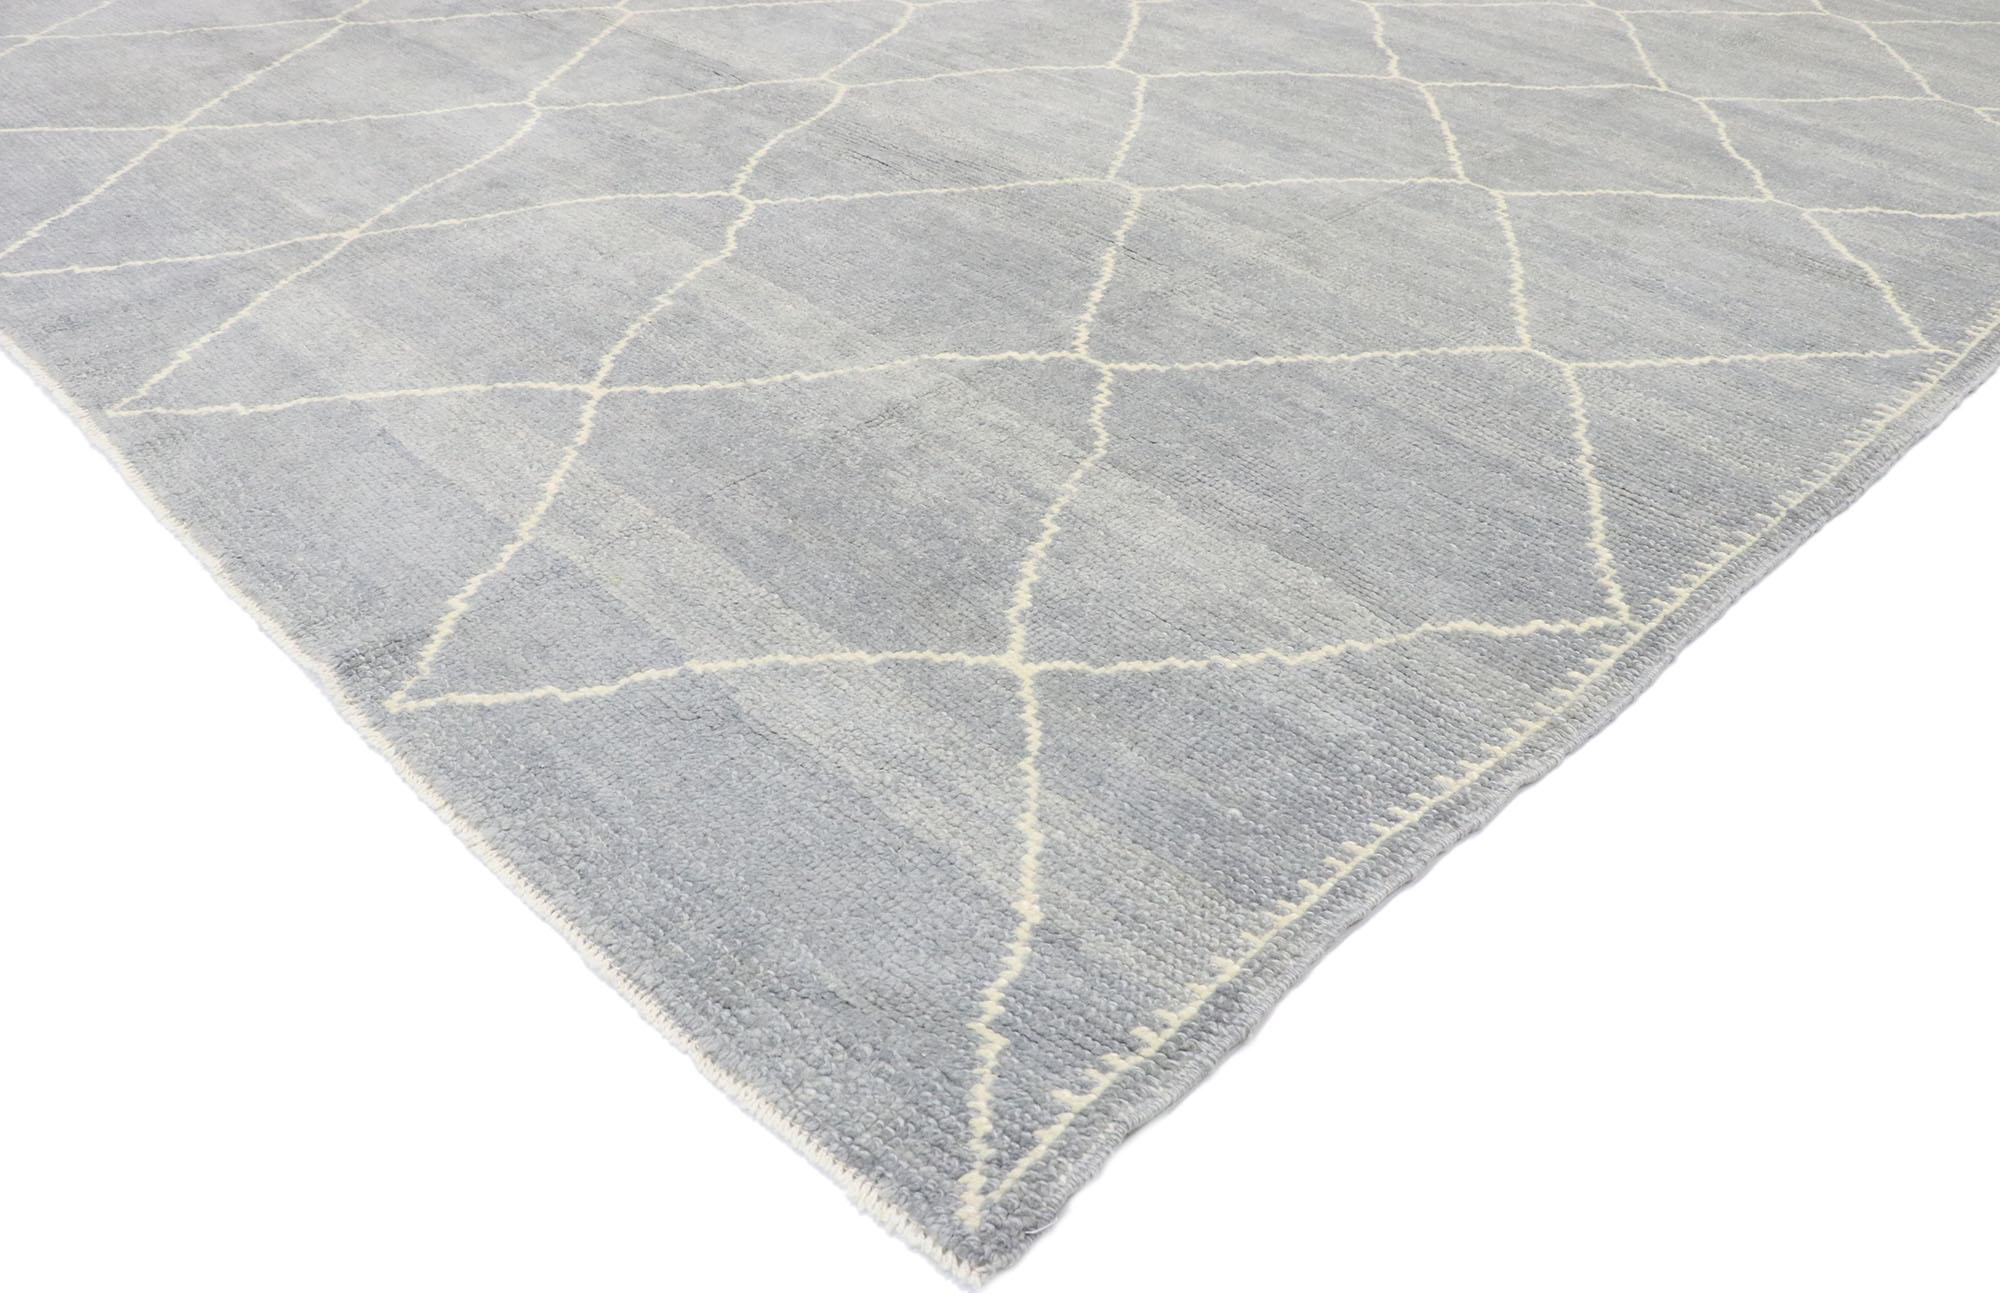 53439 New Contemporary Gray Moroccan style rug with Modern Trellis design. This hand knotted wool new contemporary Moroccan rug features an all-over diamond lattice pattern spread across an abrashed gray field. The beige lines of this piece create